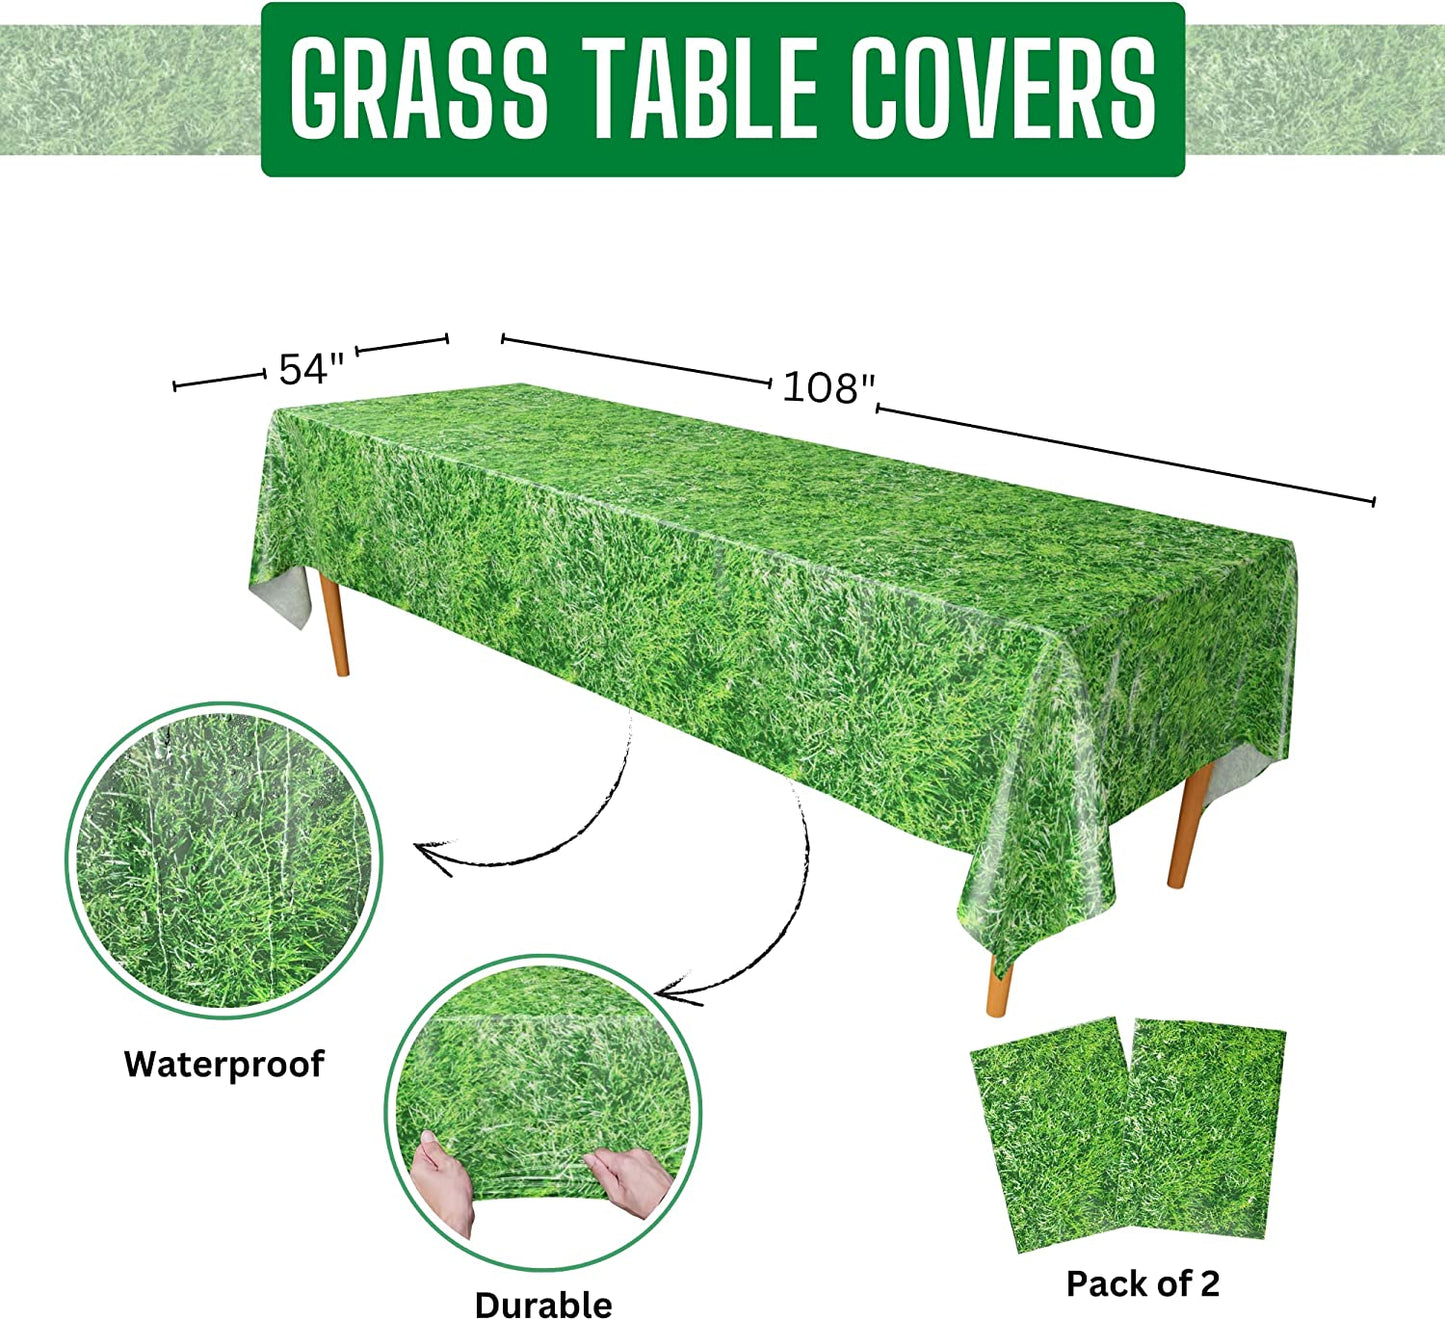 Image of the Waterproof and Durable Grass Table Covers, a pack of two XL-sized table covers measuring 54"x108". These table covers are perfect for a variety of nature-themed parties, including jungle parties, woodland birthdays, and safari-themed events. They feature a realistic grass design and are made of waterproof and durable materials, ensuring long-lasting use.